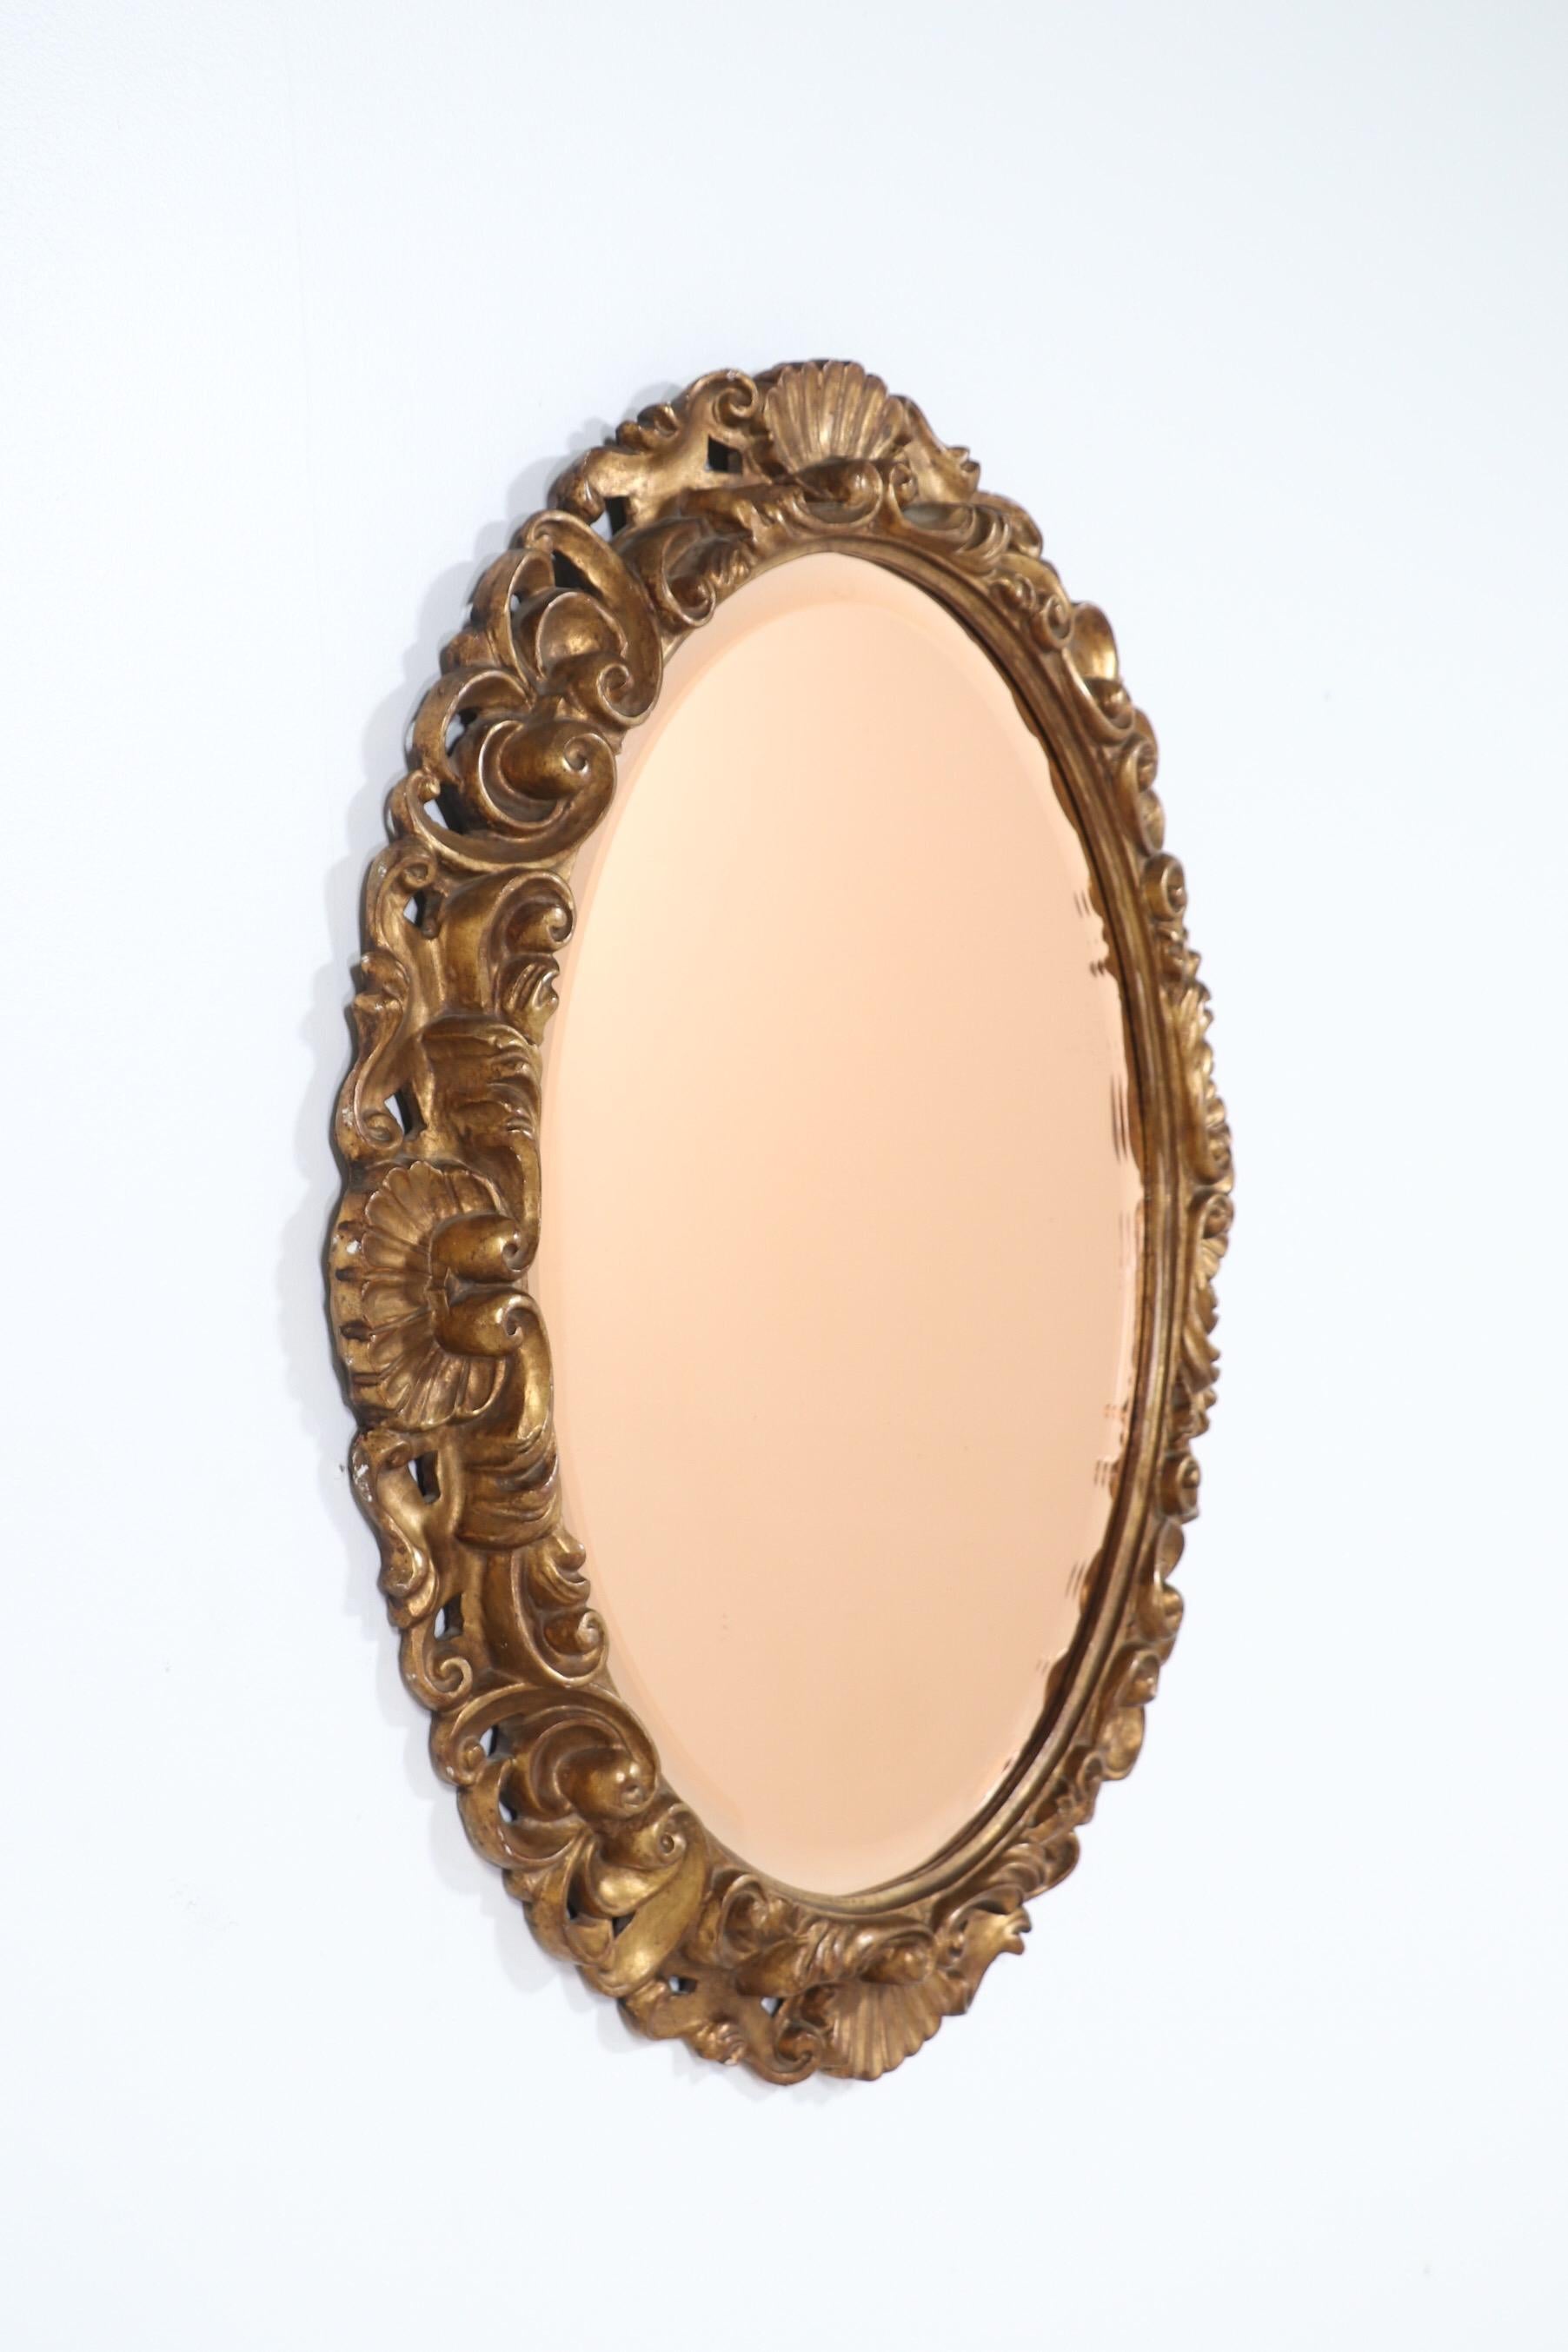 Glamorous, 1940s Italian carved giltwood frame with a rare rose-pink beveled glass mirror insert by Fratelli Paoletti, Firenze. 

Very decorative mirror, perfect for adding a touch of European flare to any interior.






 